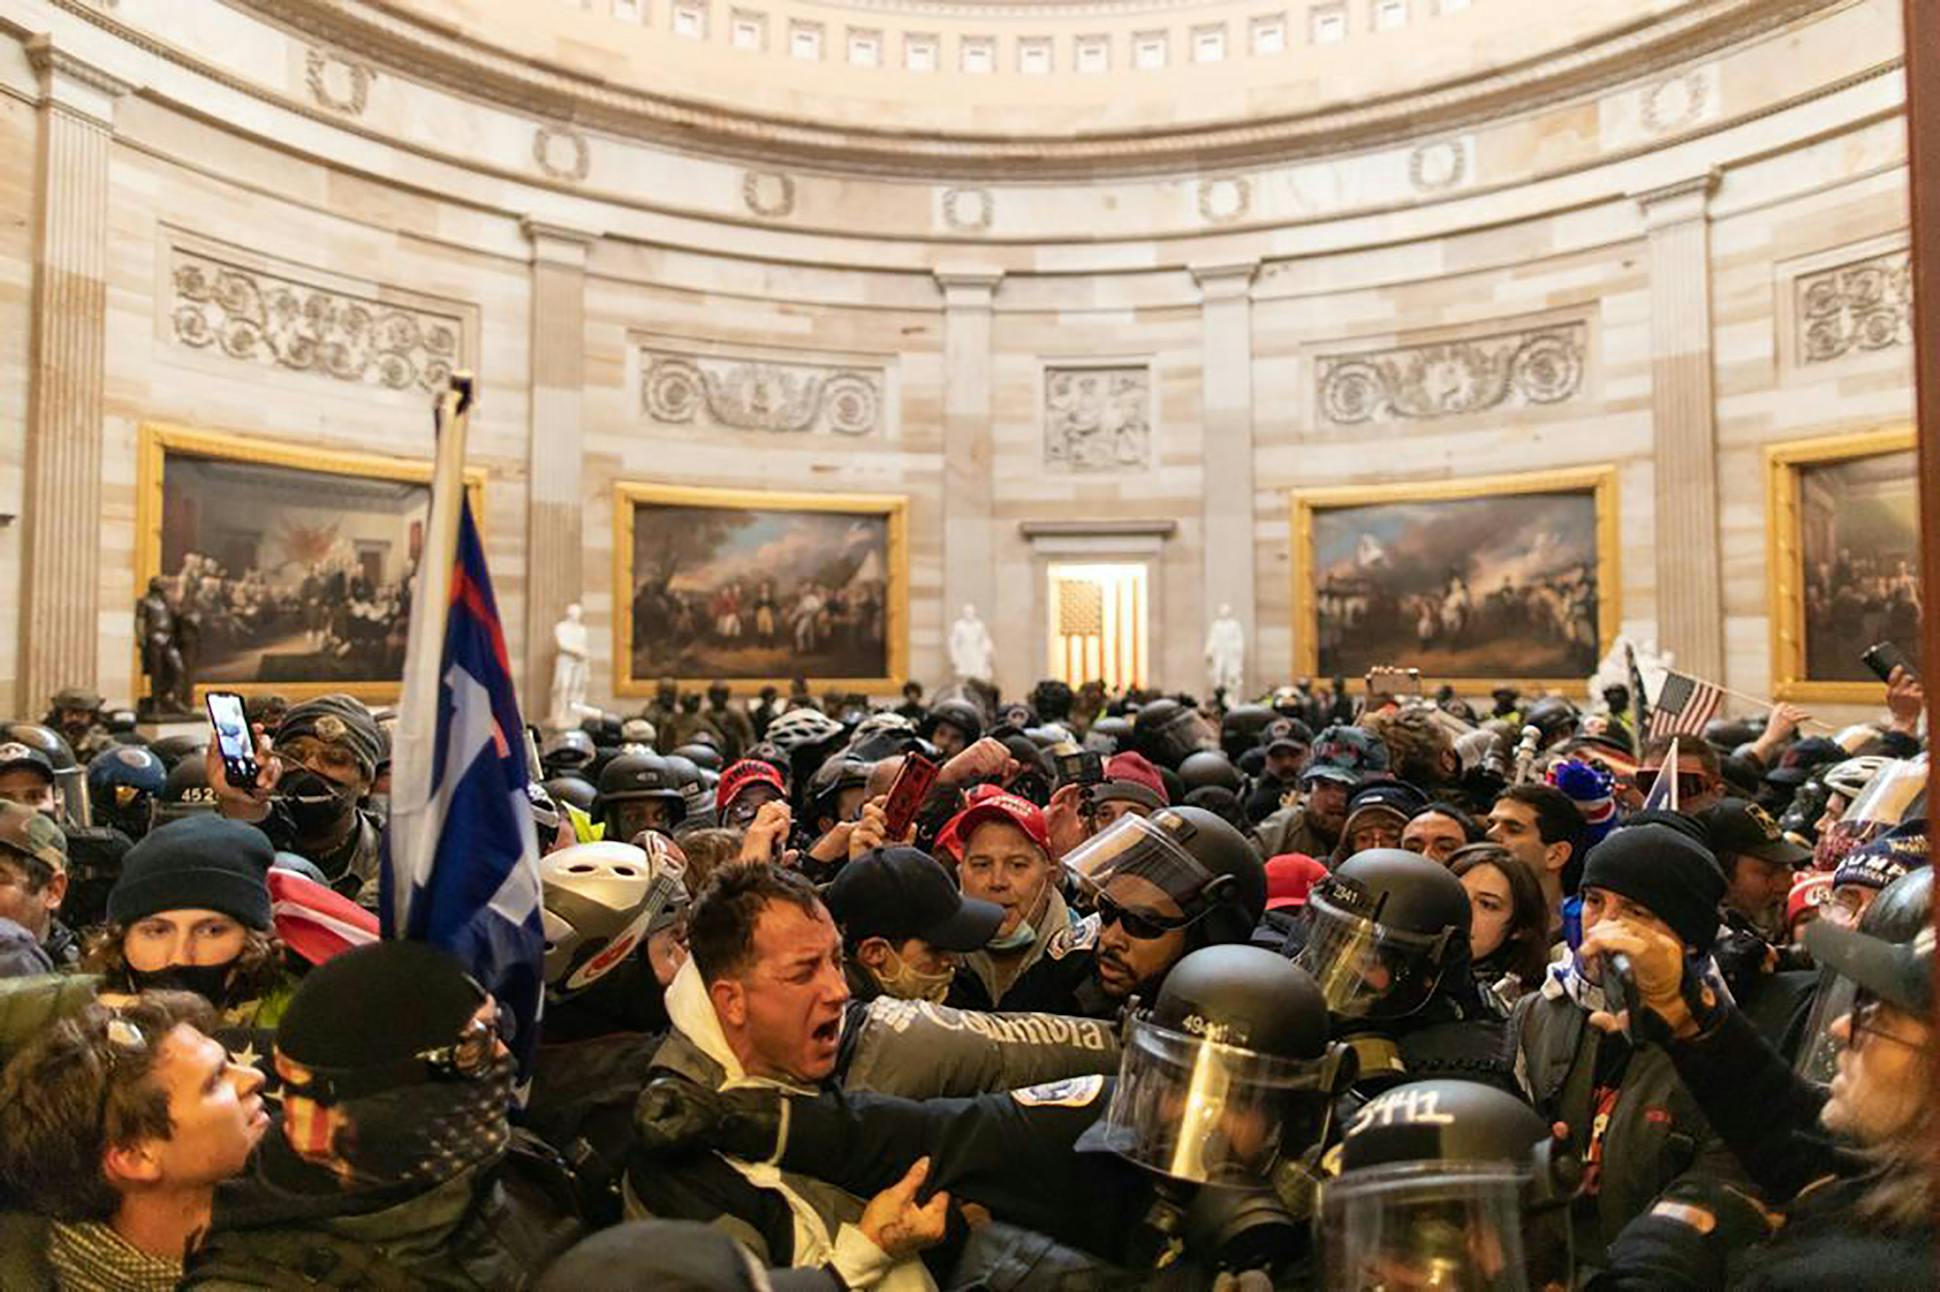 The Jan. 6, 2021, riot in support of then-President Donald Trump was the first large-scale breach of the U.S. Capitol since British troops did so in 1814.